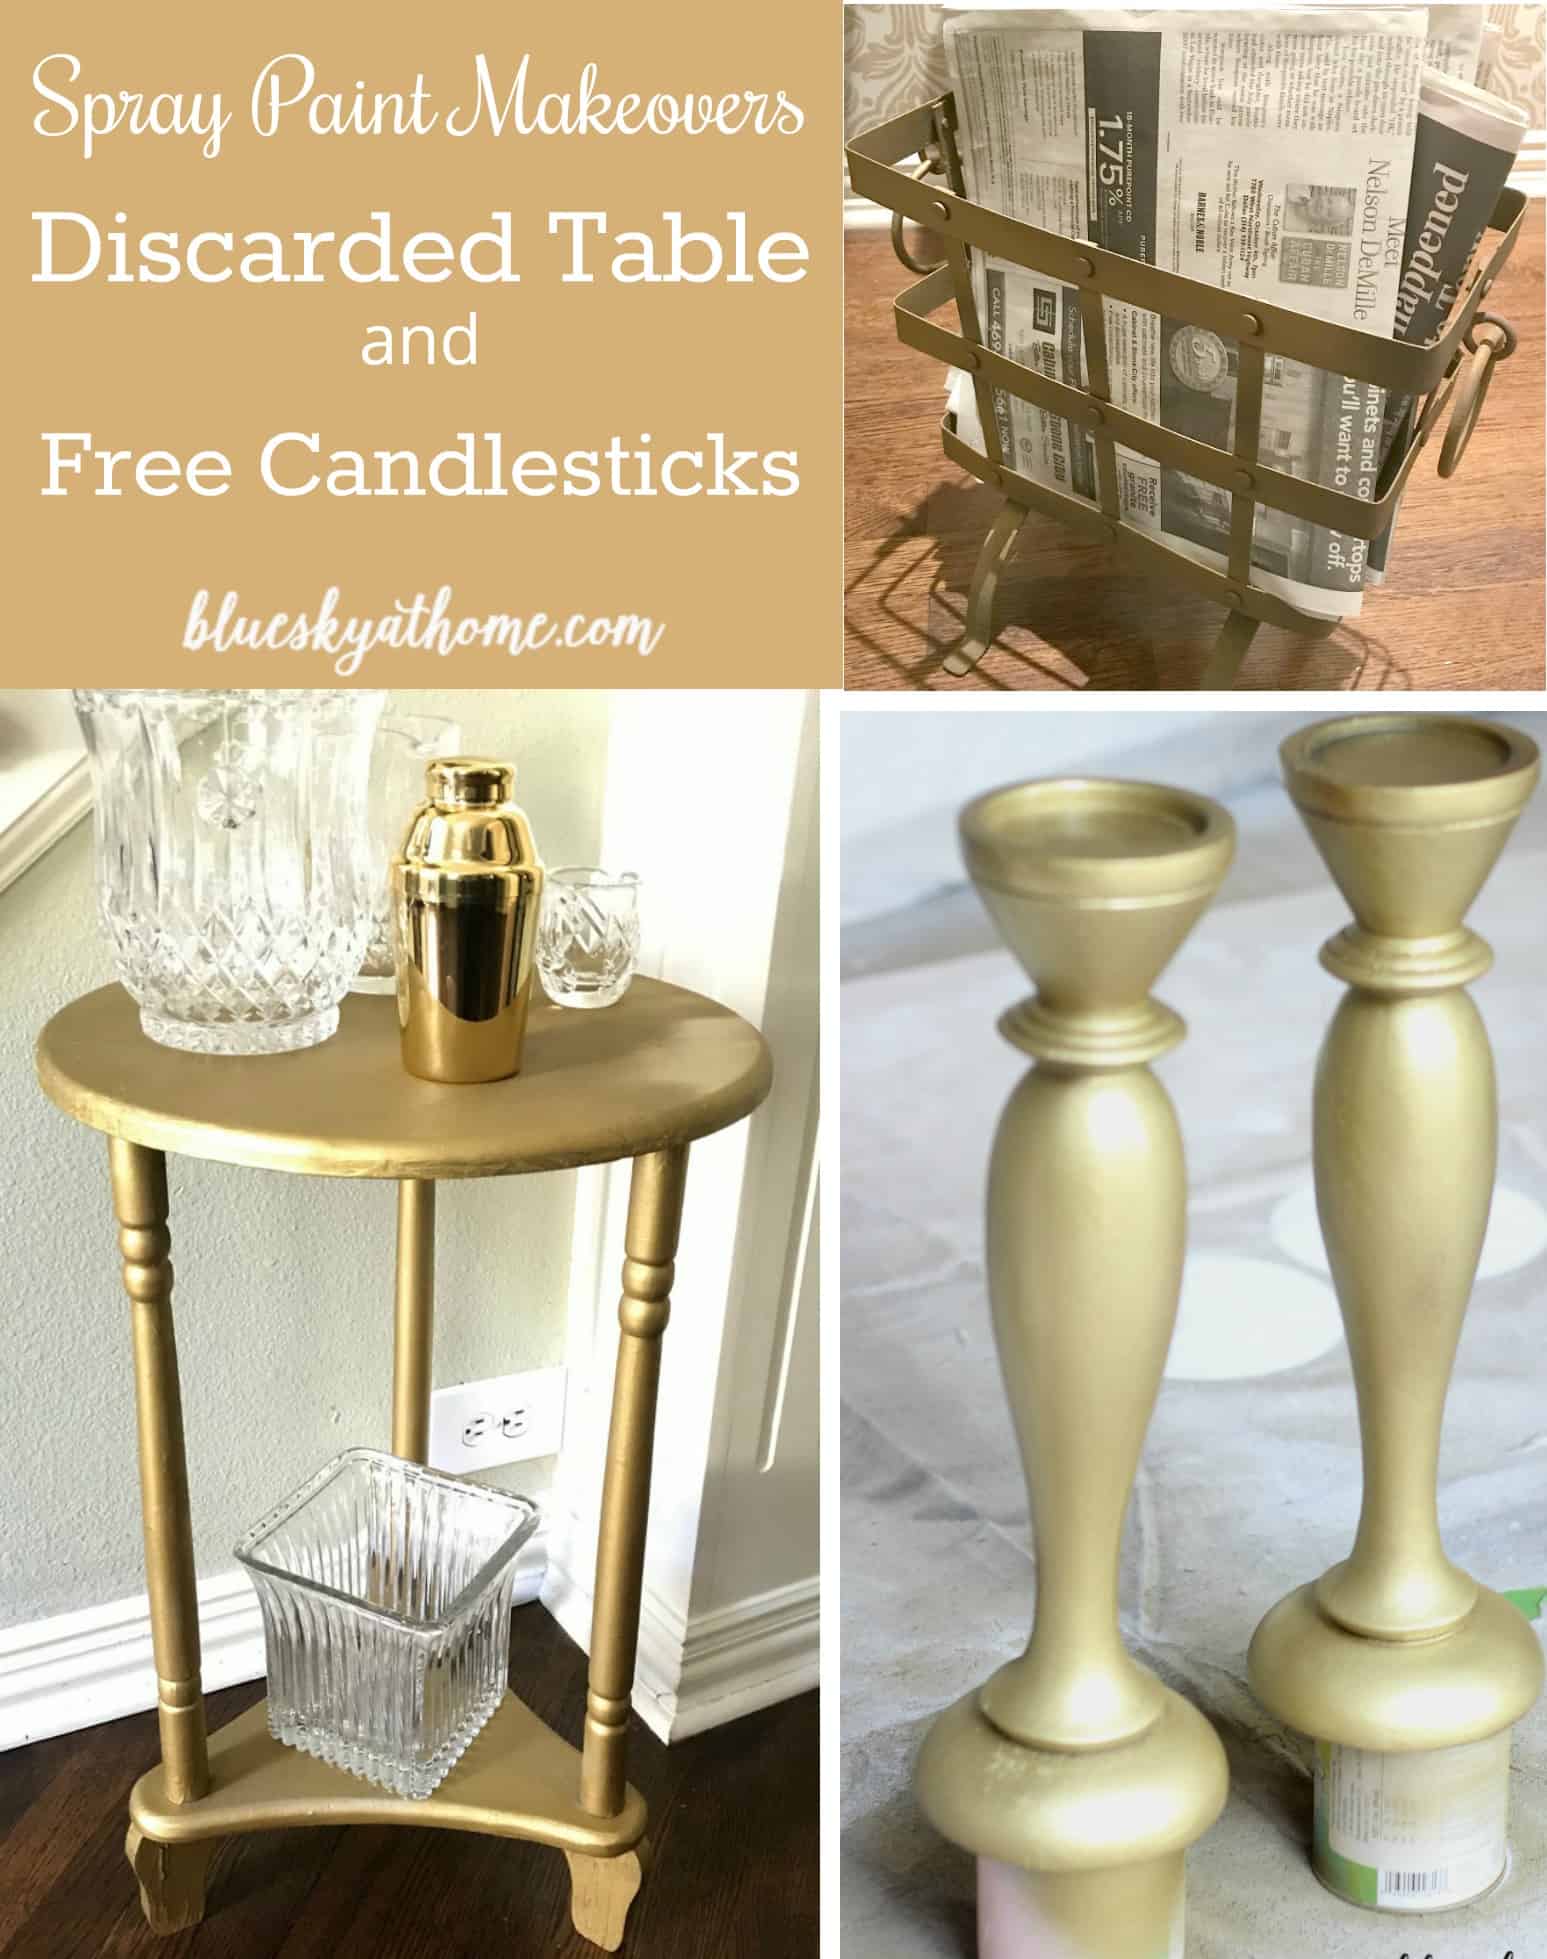 Spray Paint Make Overs ~ Discarded Table and Free Candlesticks. For under $10, a little spray paint works wonders on 2 discards. BlueskyatHome.com